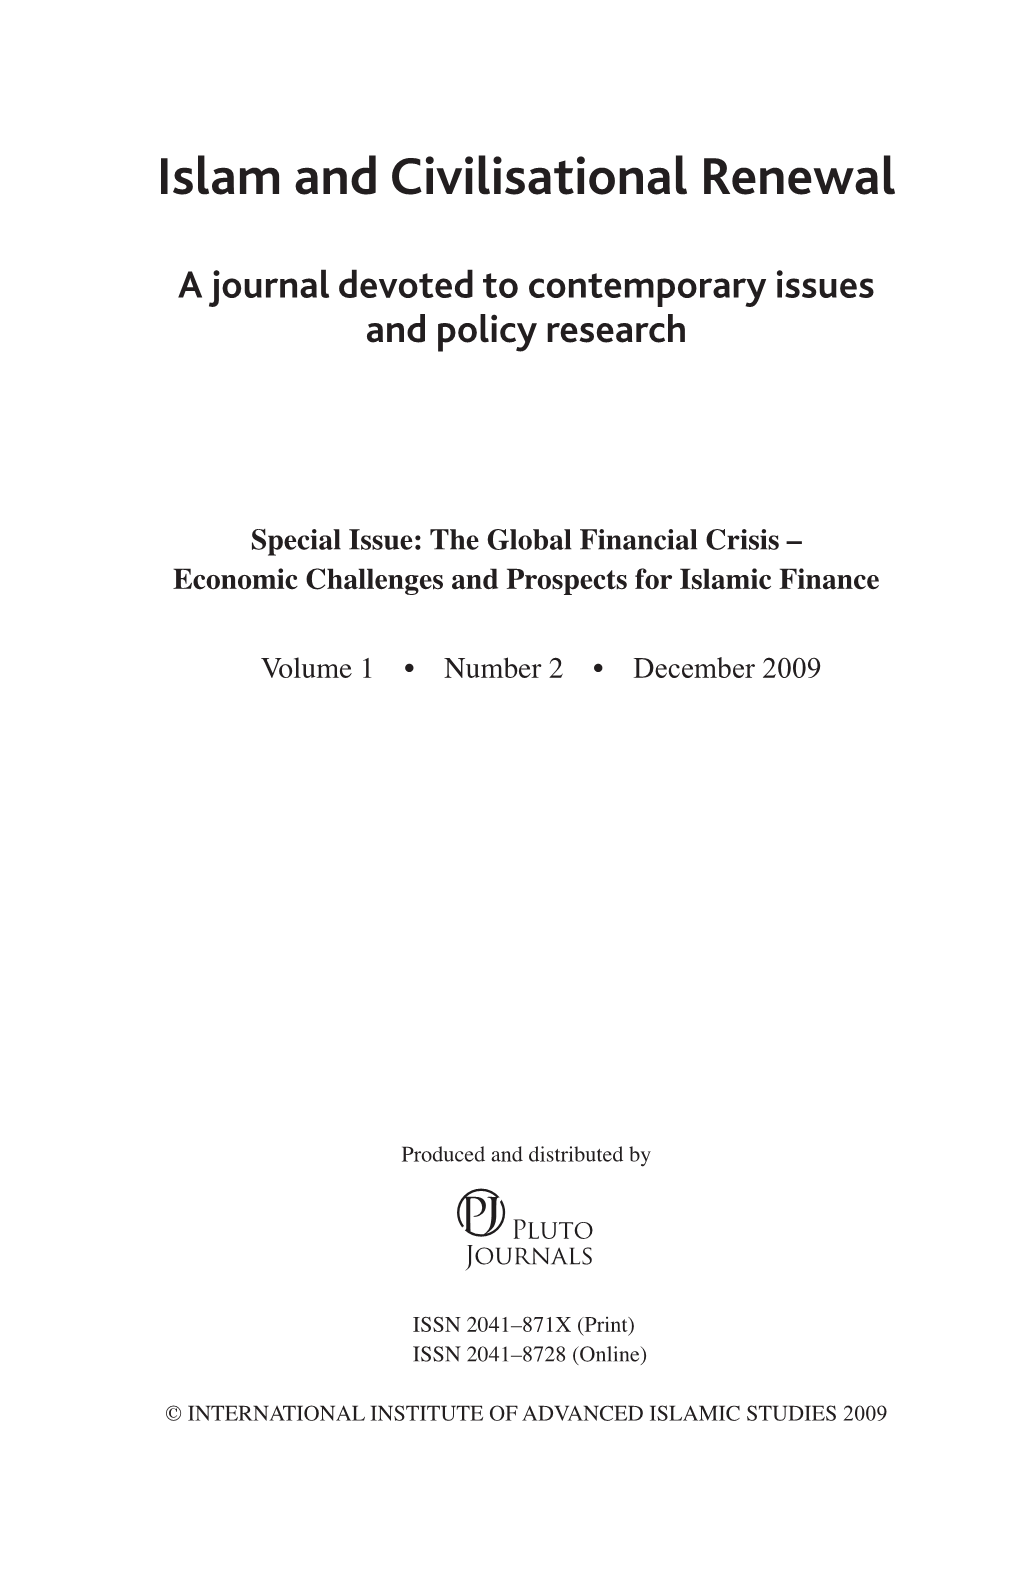 The Global Financial Crisis – Economic Challenges and Prospects for Islamic Finance